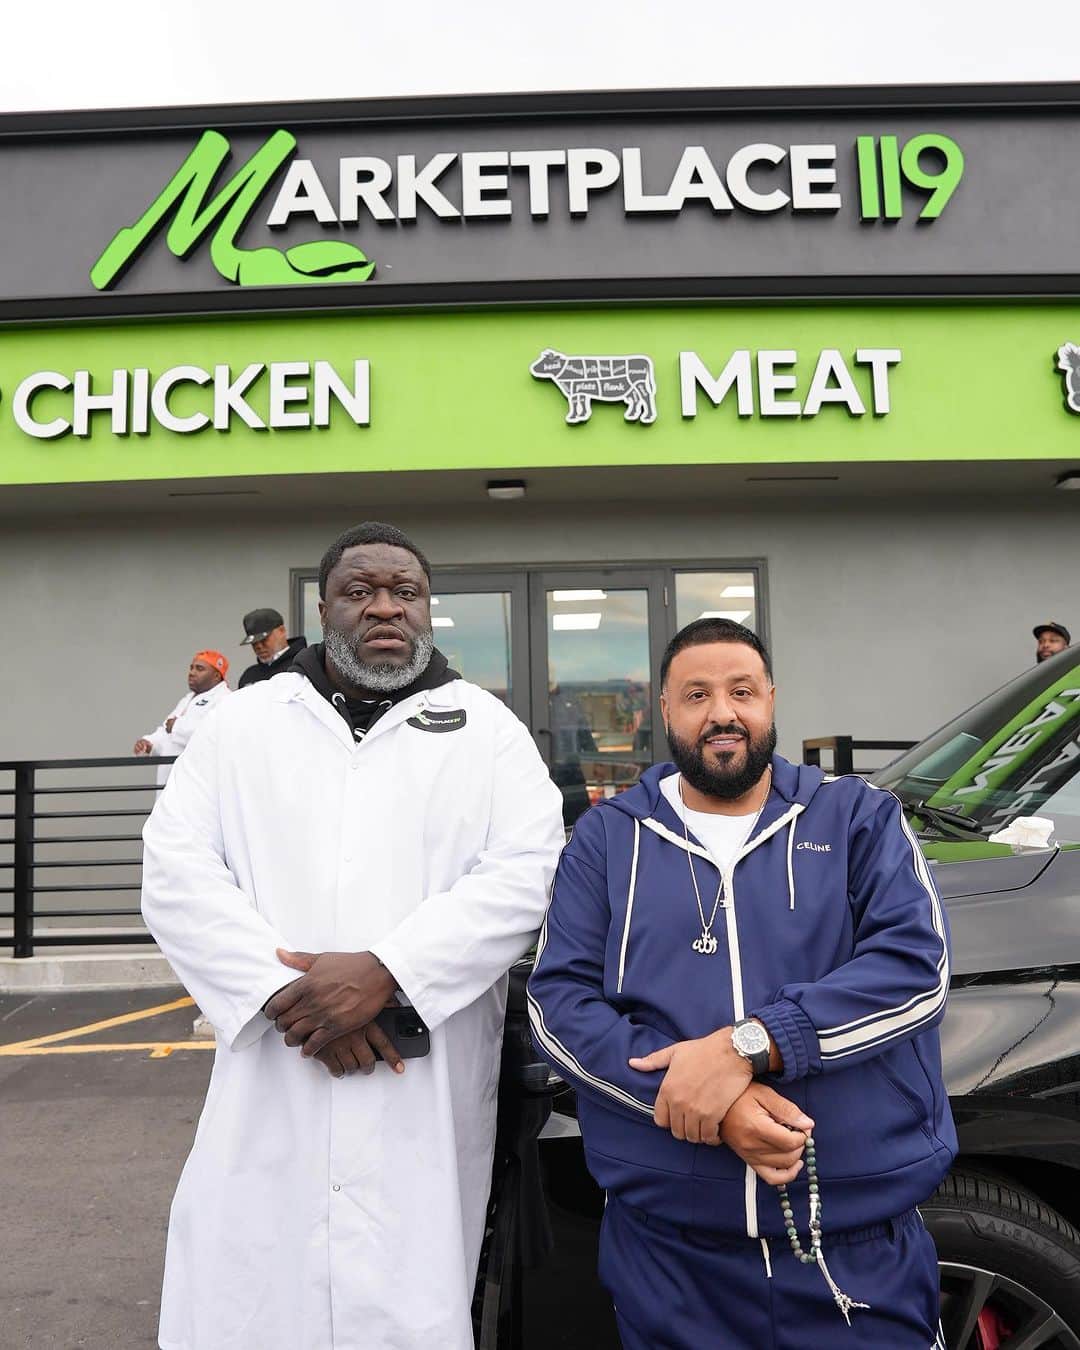 DJキャレドのインスタグラム：「Miami go check out @marketplace119_miami it’s amazing just loaded my Freezer 🆙 wit lobsters 🦞 steaks 🥩 shrimp 🍤 CONGRATS MY BROTHER E CLASS ON ANOTHER ONE LOVE IS THE ONLY WAY !」